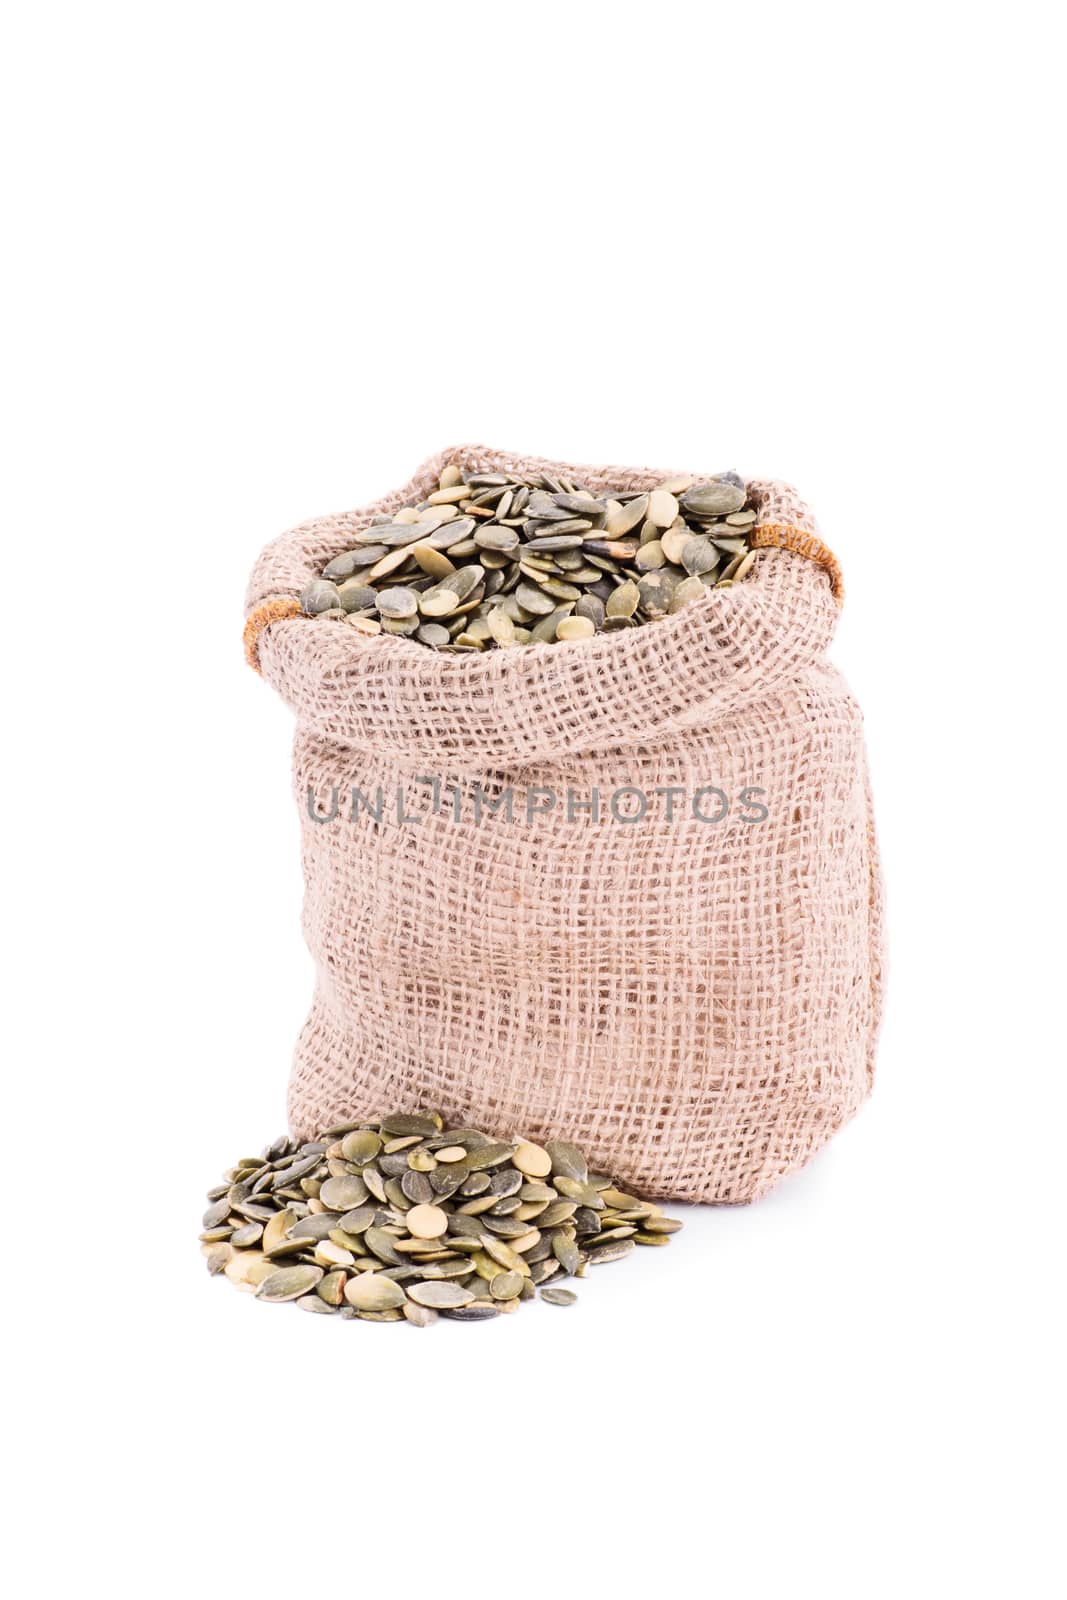 Small burlap sack of fresh pumpkin seeds, isolated on white background.